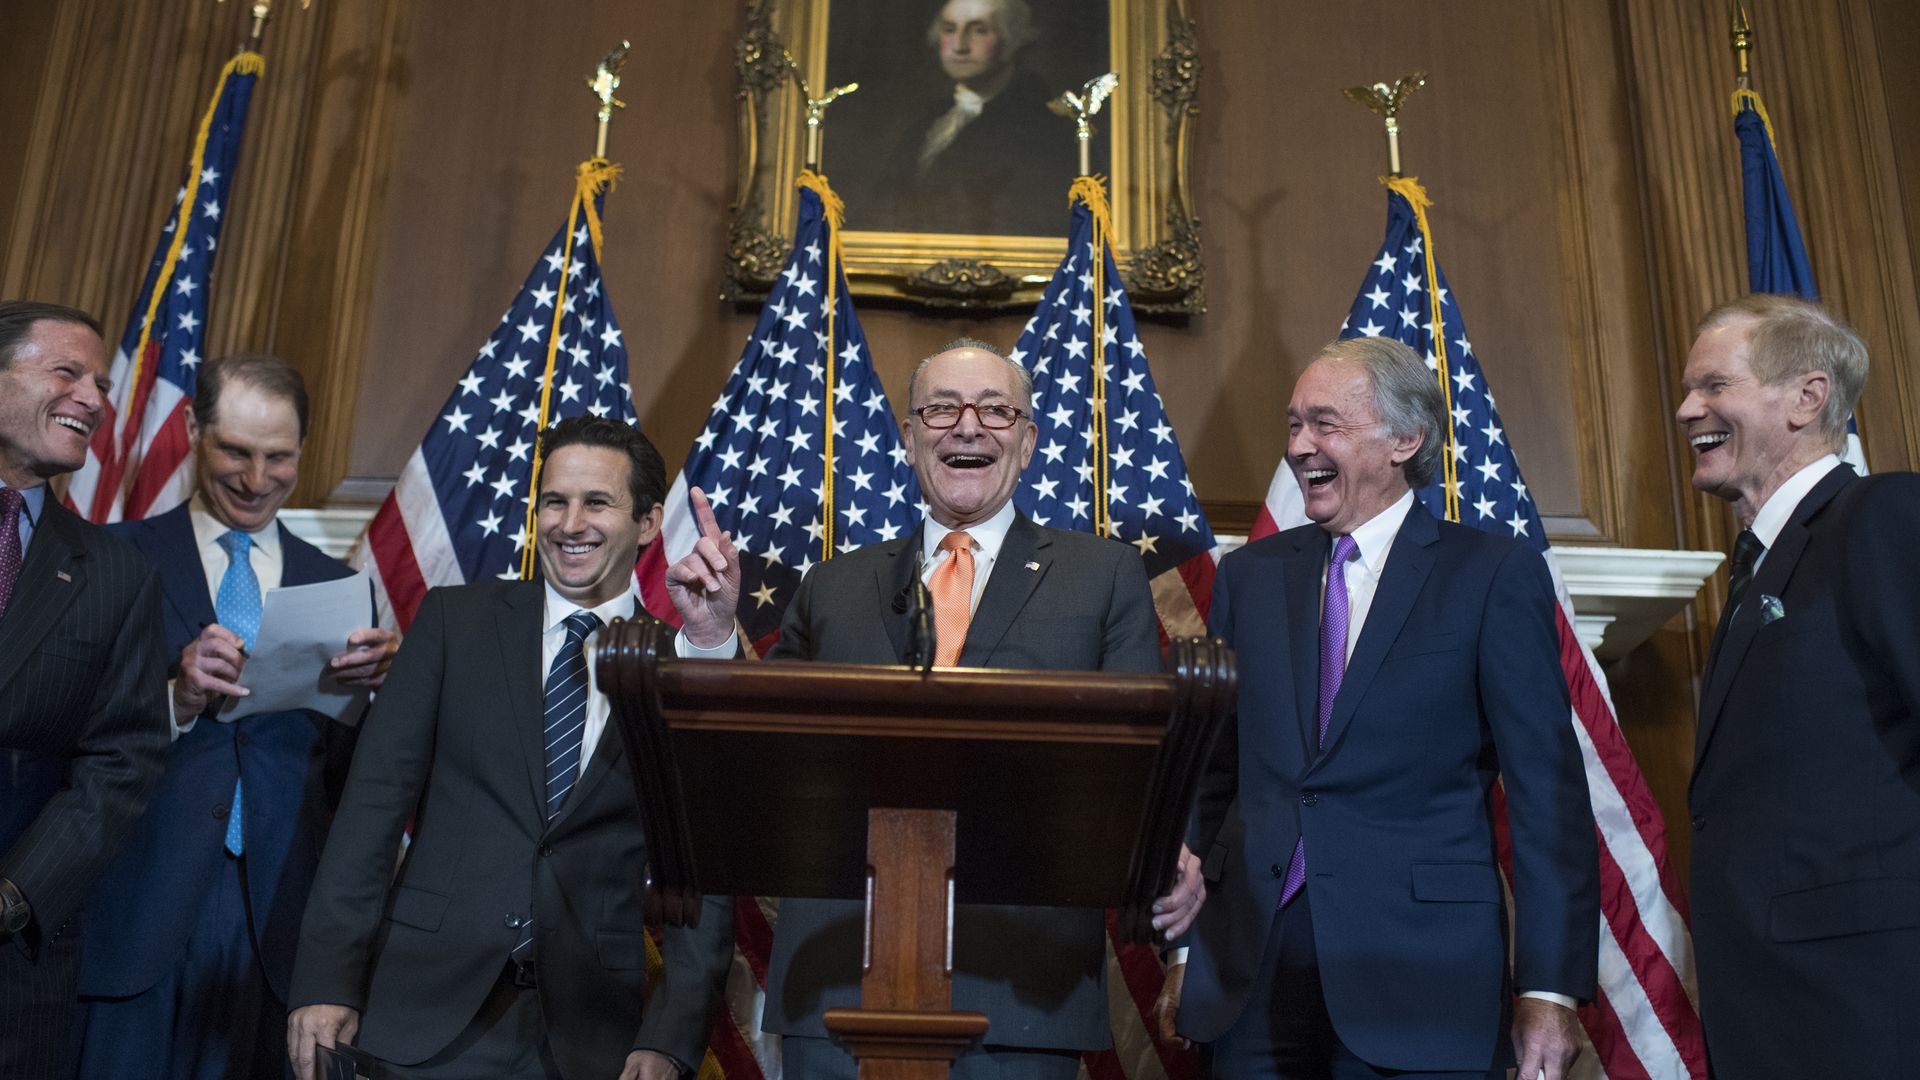 Sen. Chuck Schumer at a podium, surrounded by other Senate Democrats